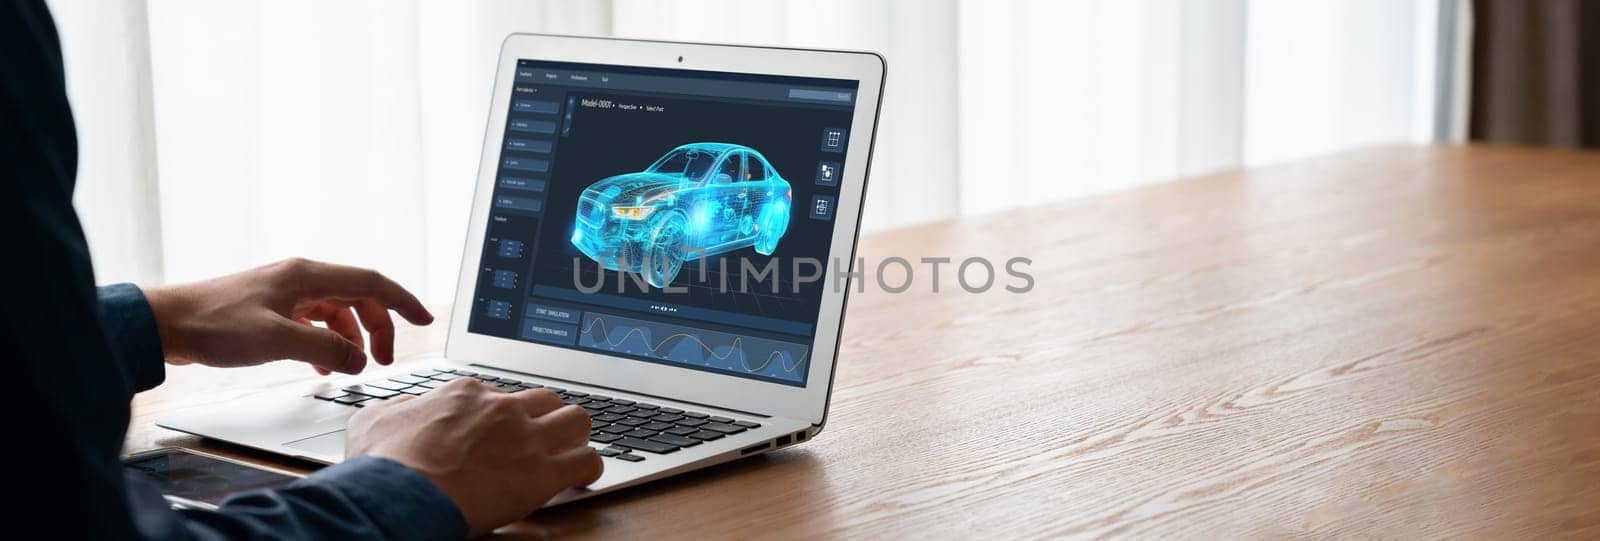 Electric car design software on computer screen show simulation blueprint snugly by biancoblue